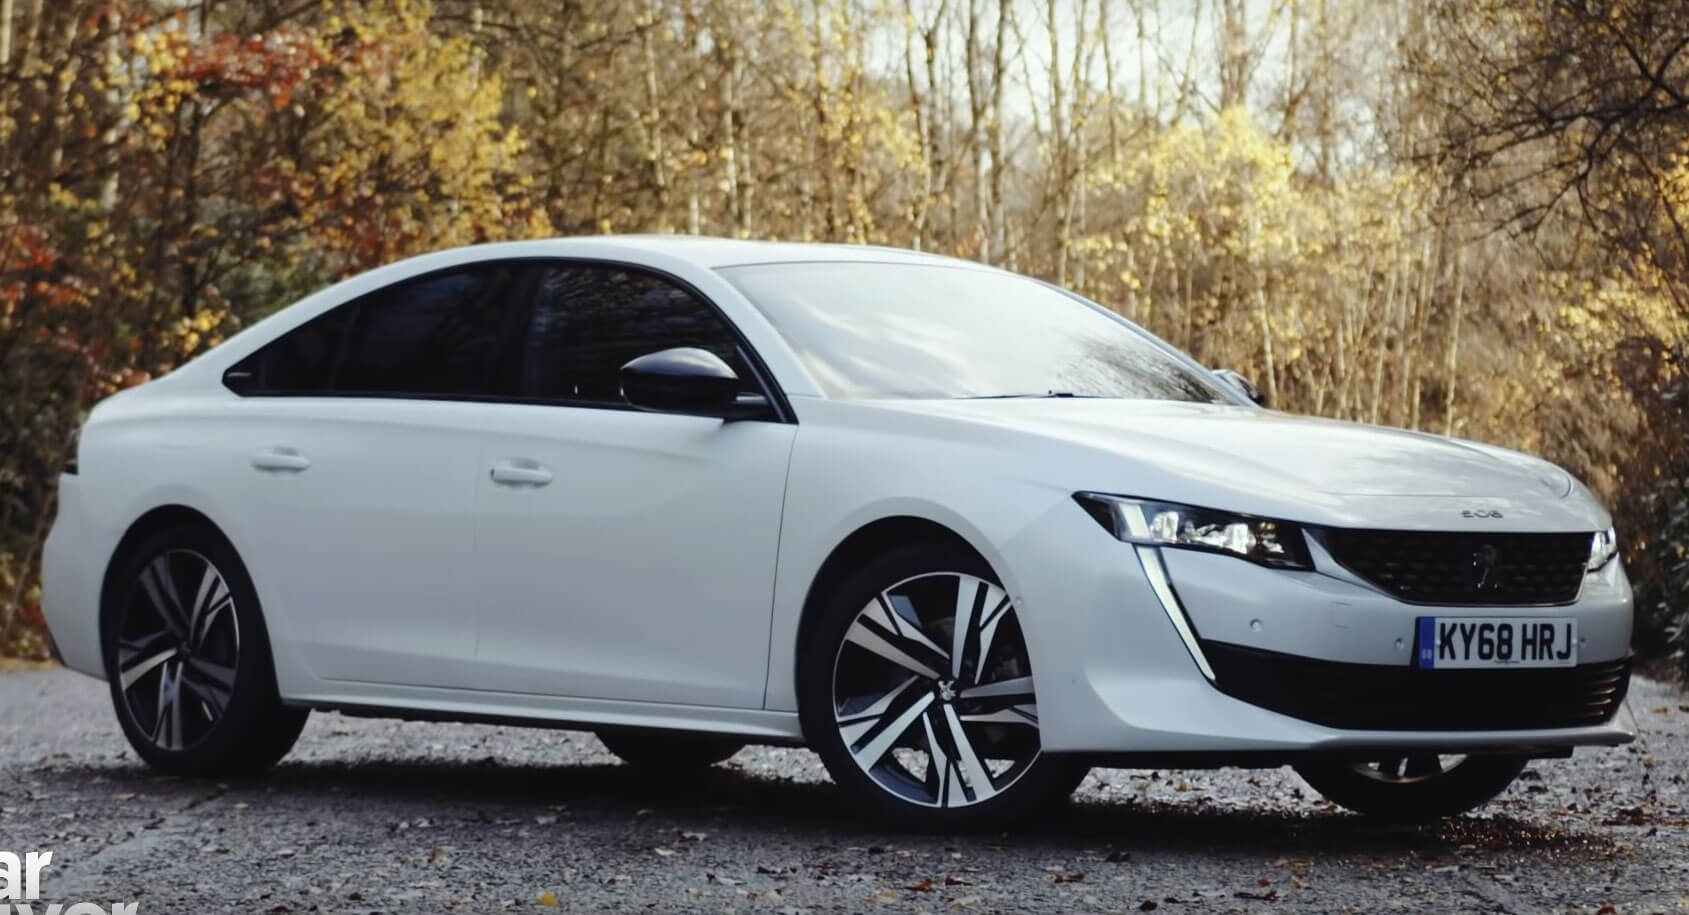 2019 Peugeot 508 Has The ‘Wow’ Factor, But What About The